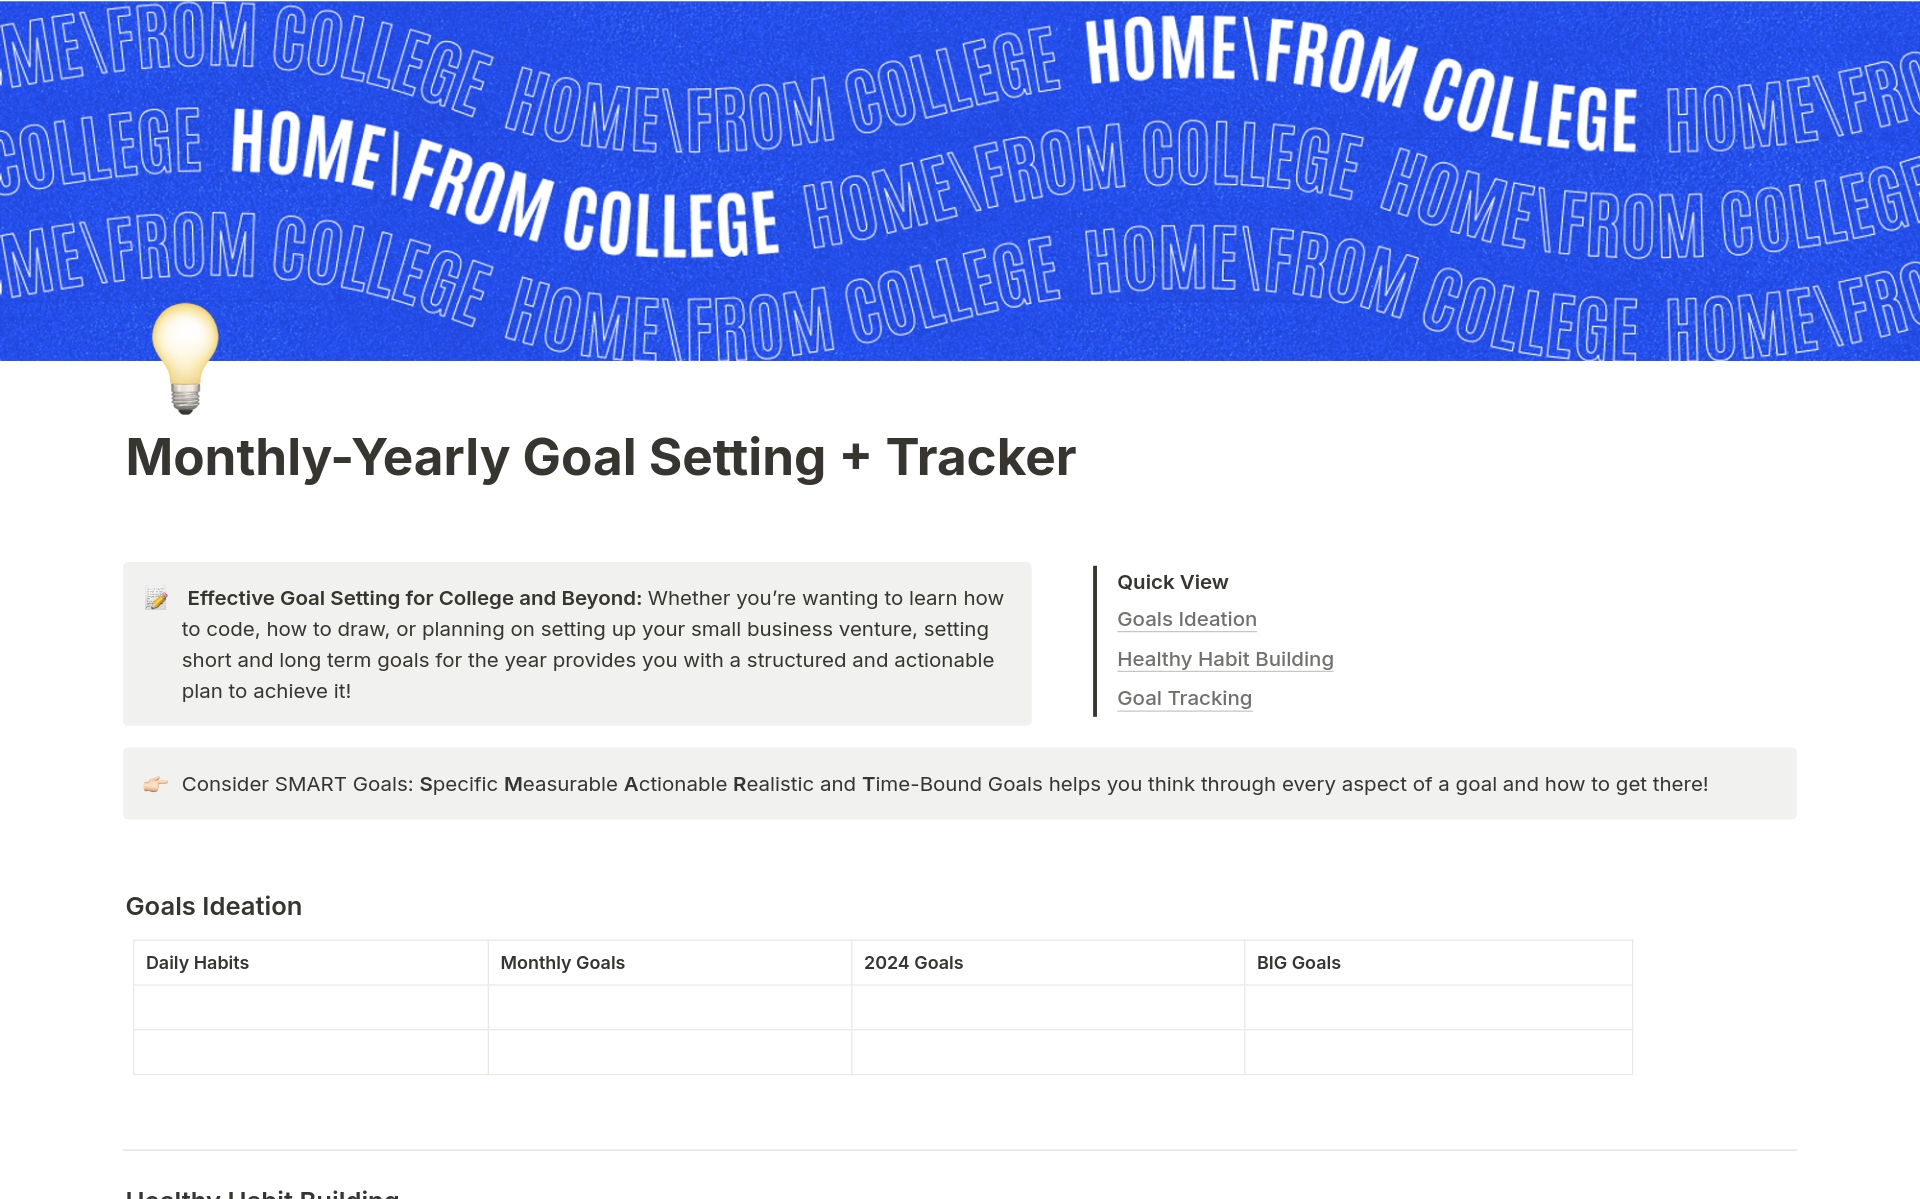 Our goal setting tracker template provides a structured framework for you to set and track your personal and professional goals over time